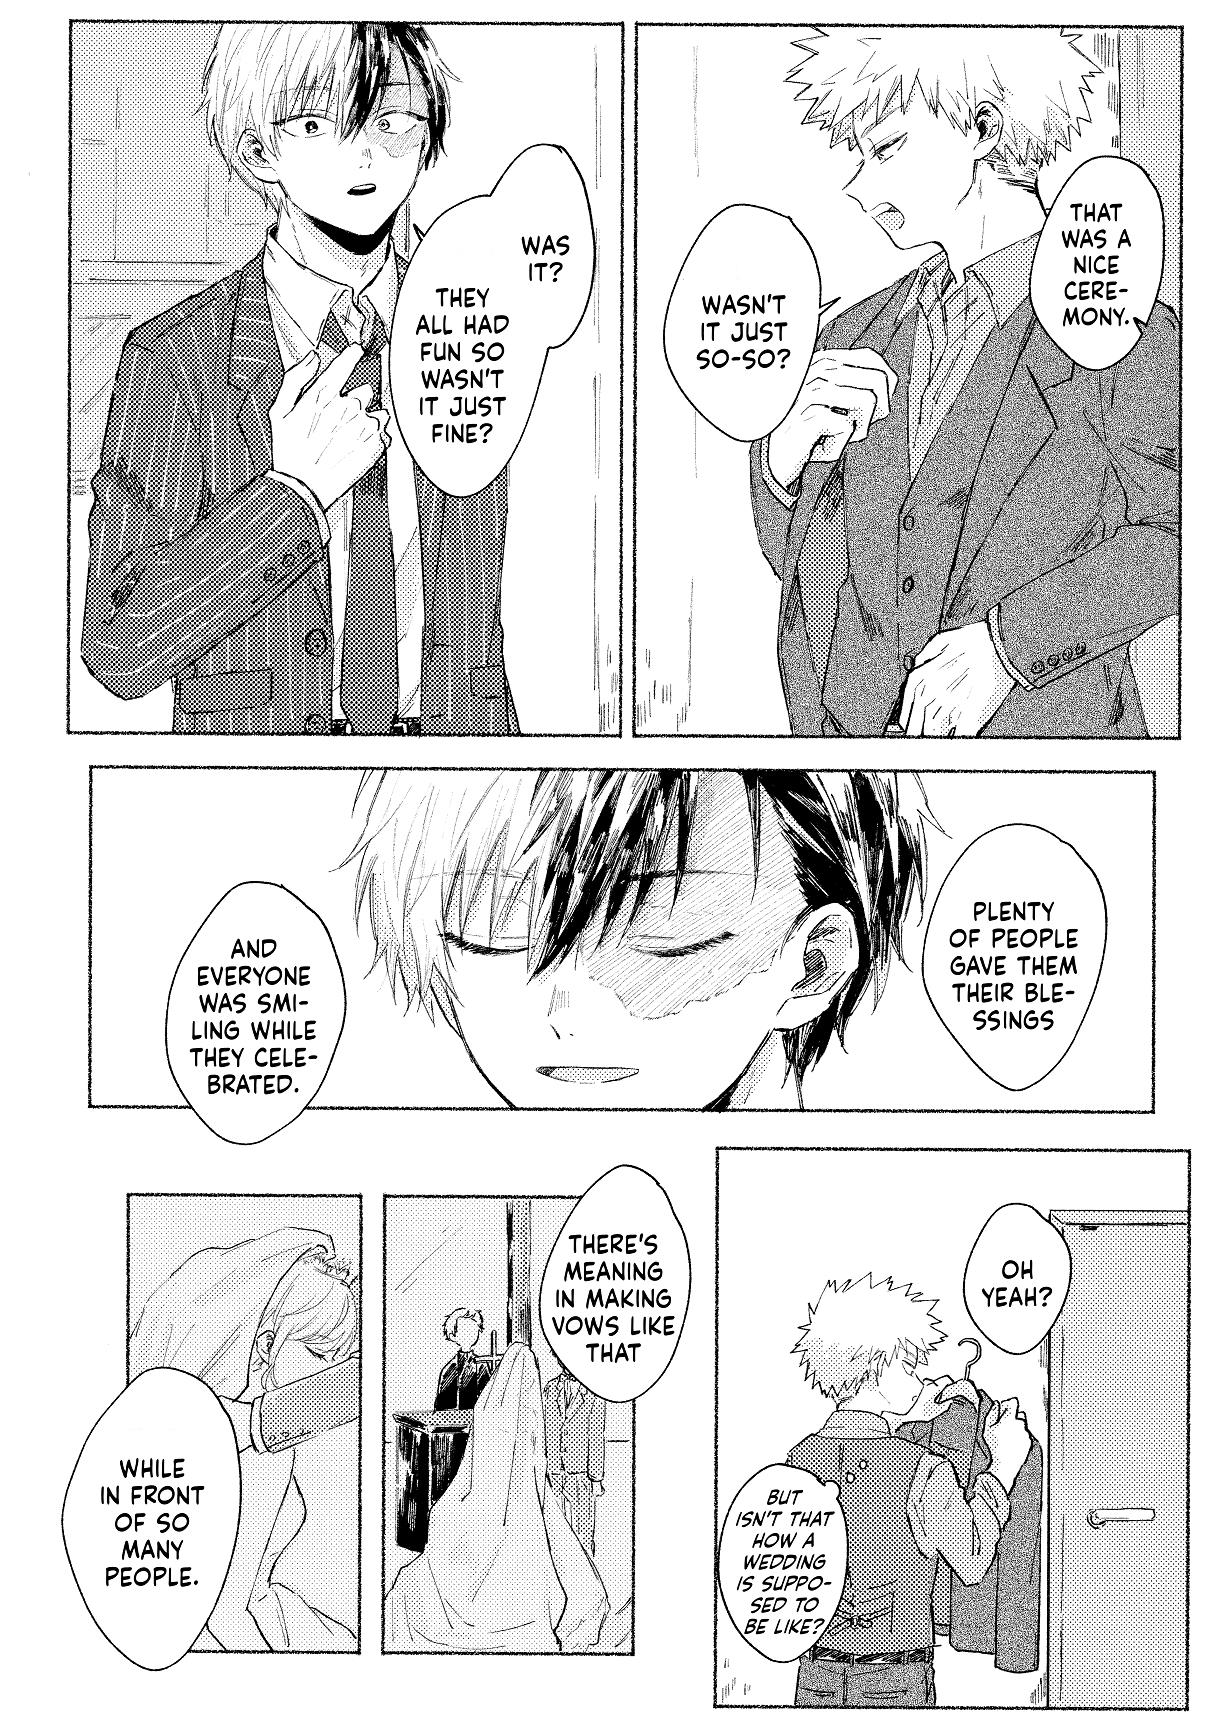 Cheers! - Shouto X Katsuki Marriage Anthology Vol.1 Chapter 13: No Encore, Please - Picture 3